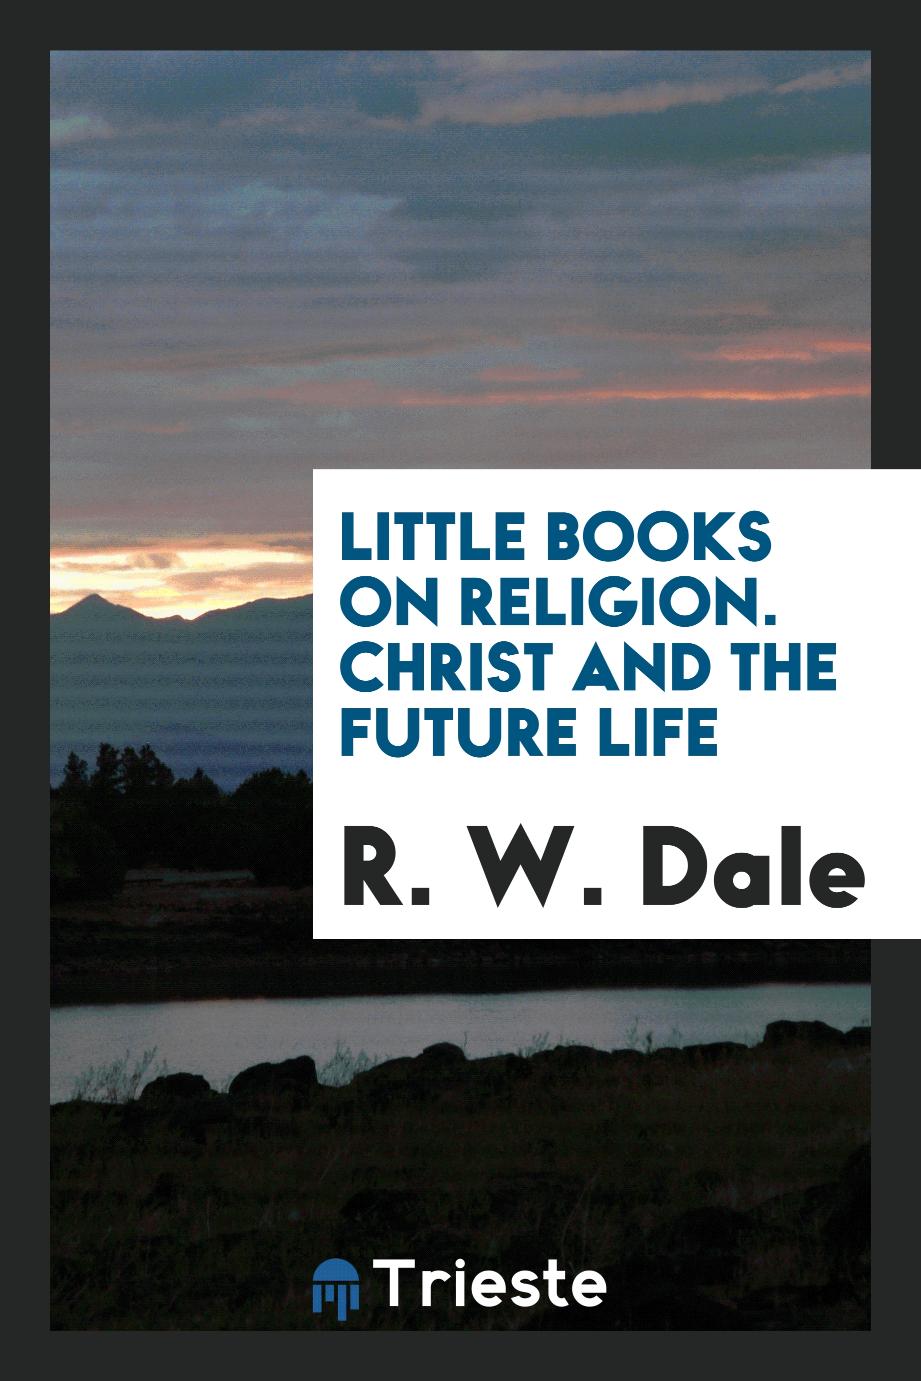 Little books on Religion. Christ and the future life